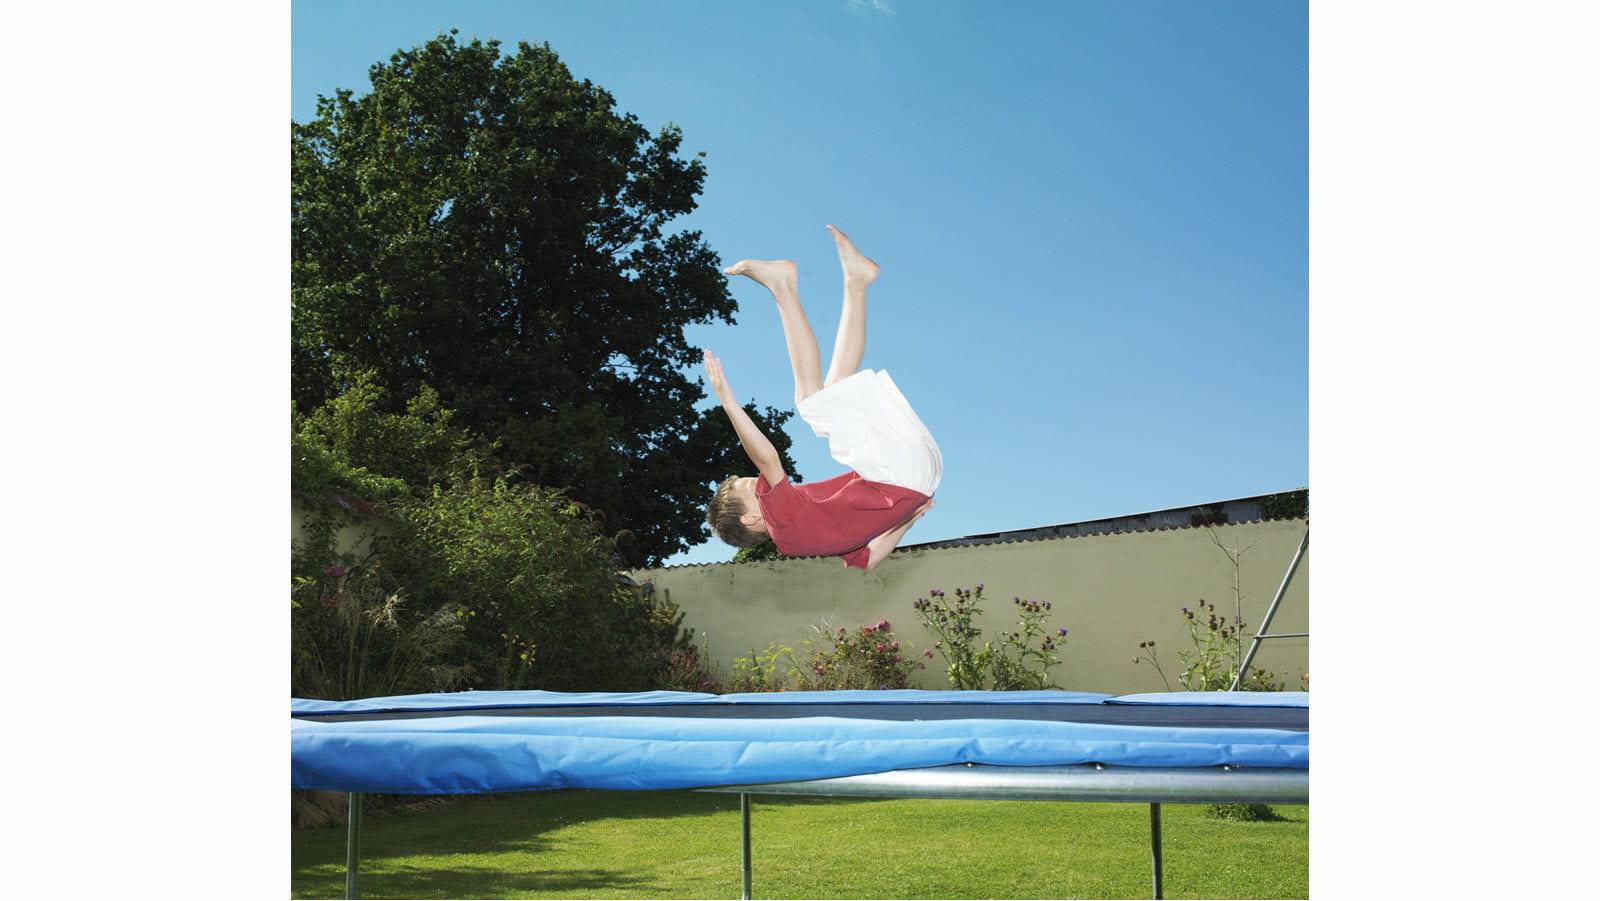 Child flps on an outdoor trampoline